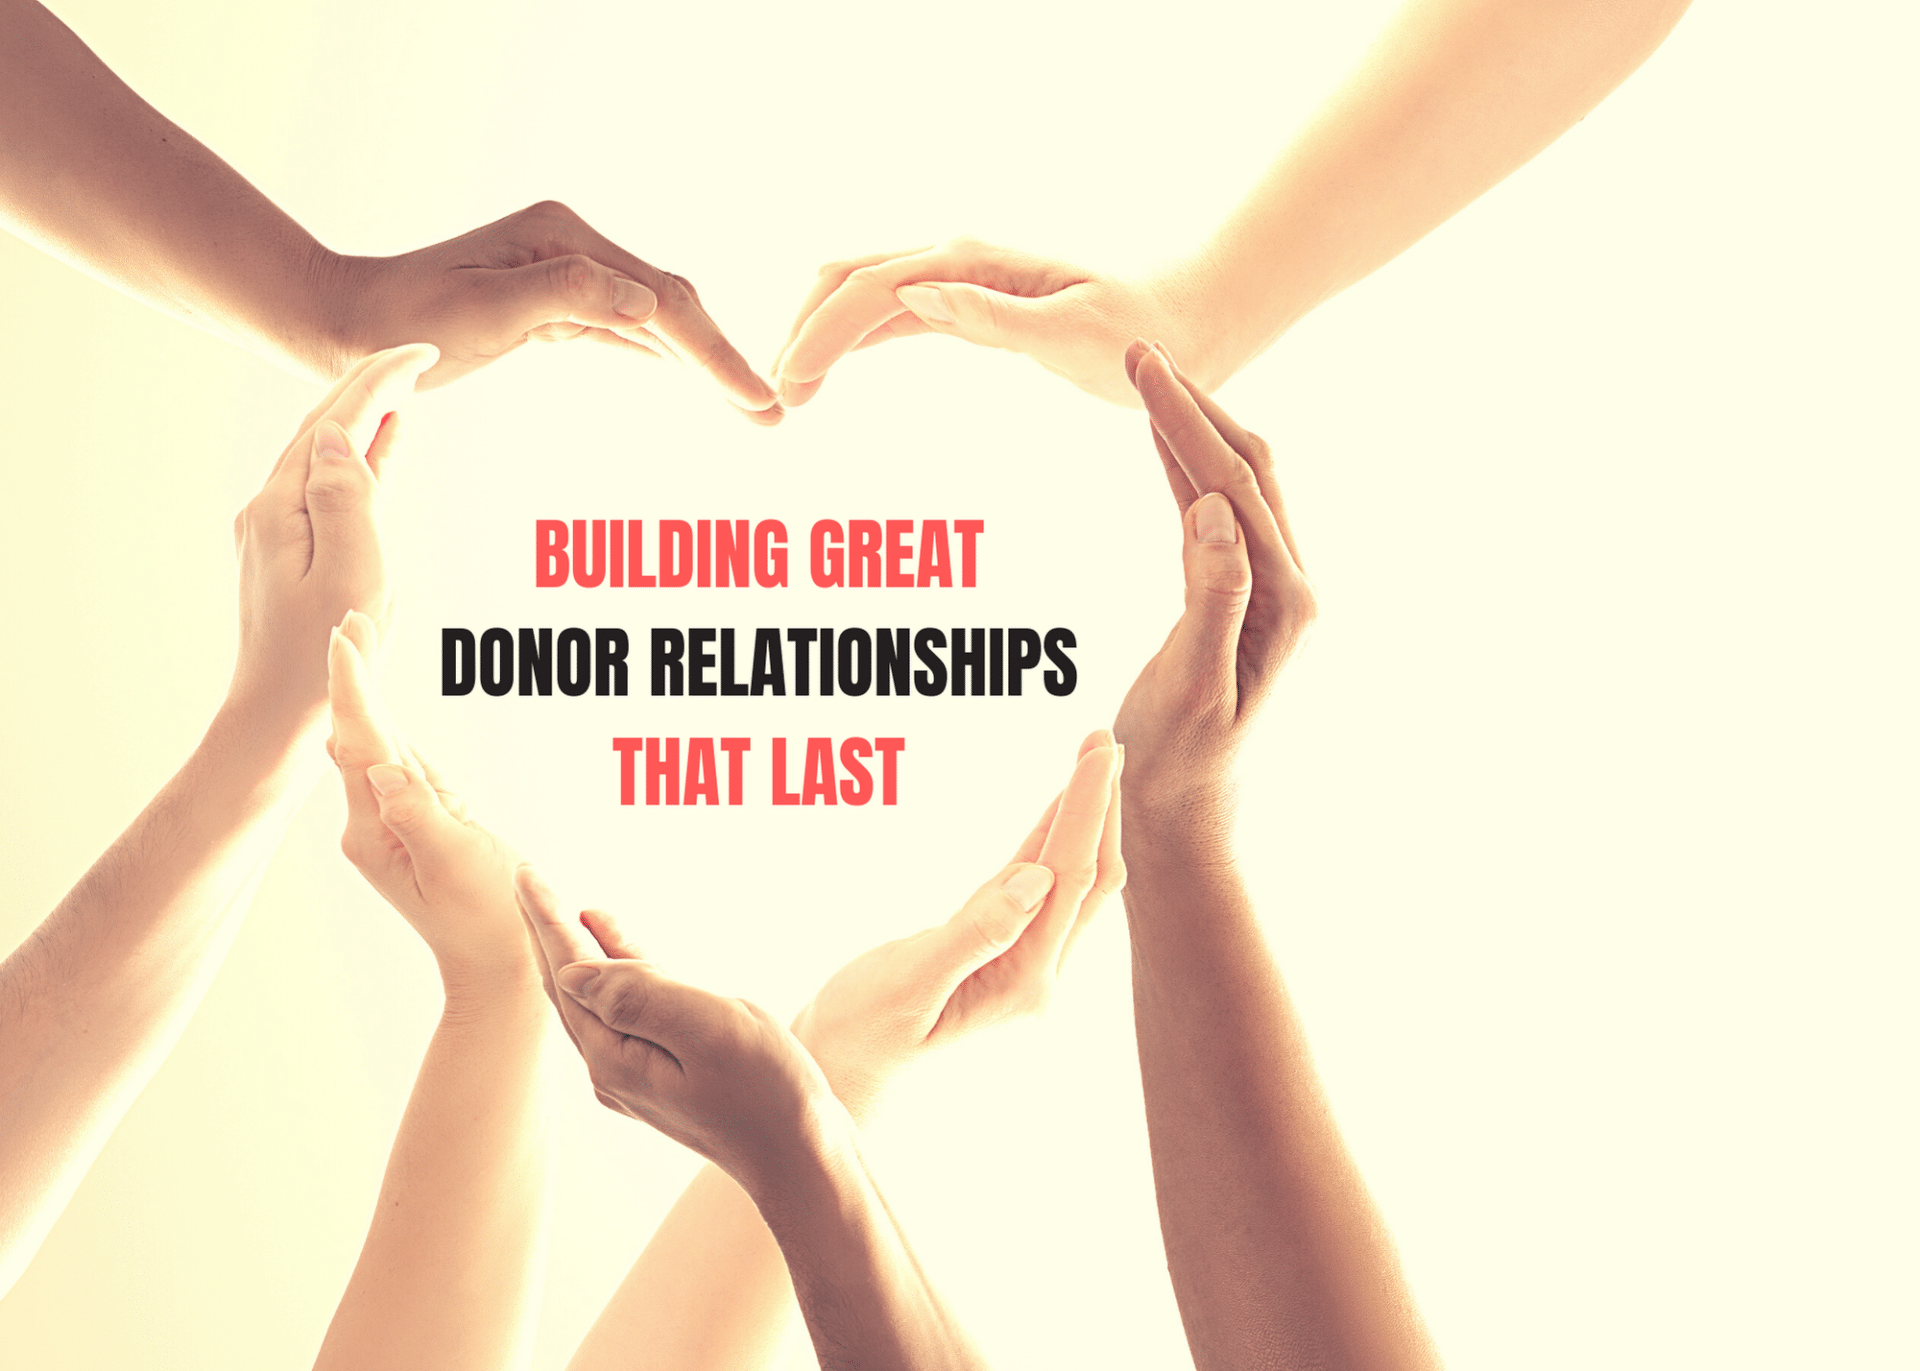 Building great donor relationships that last – Playing the long game